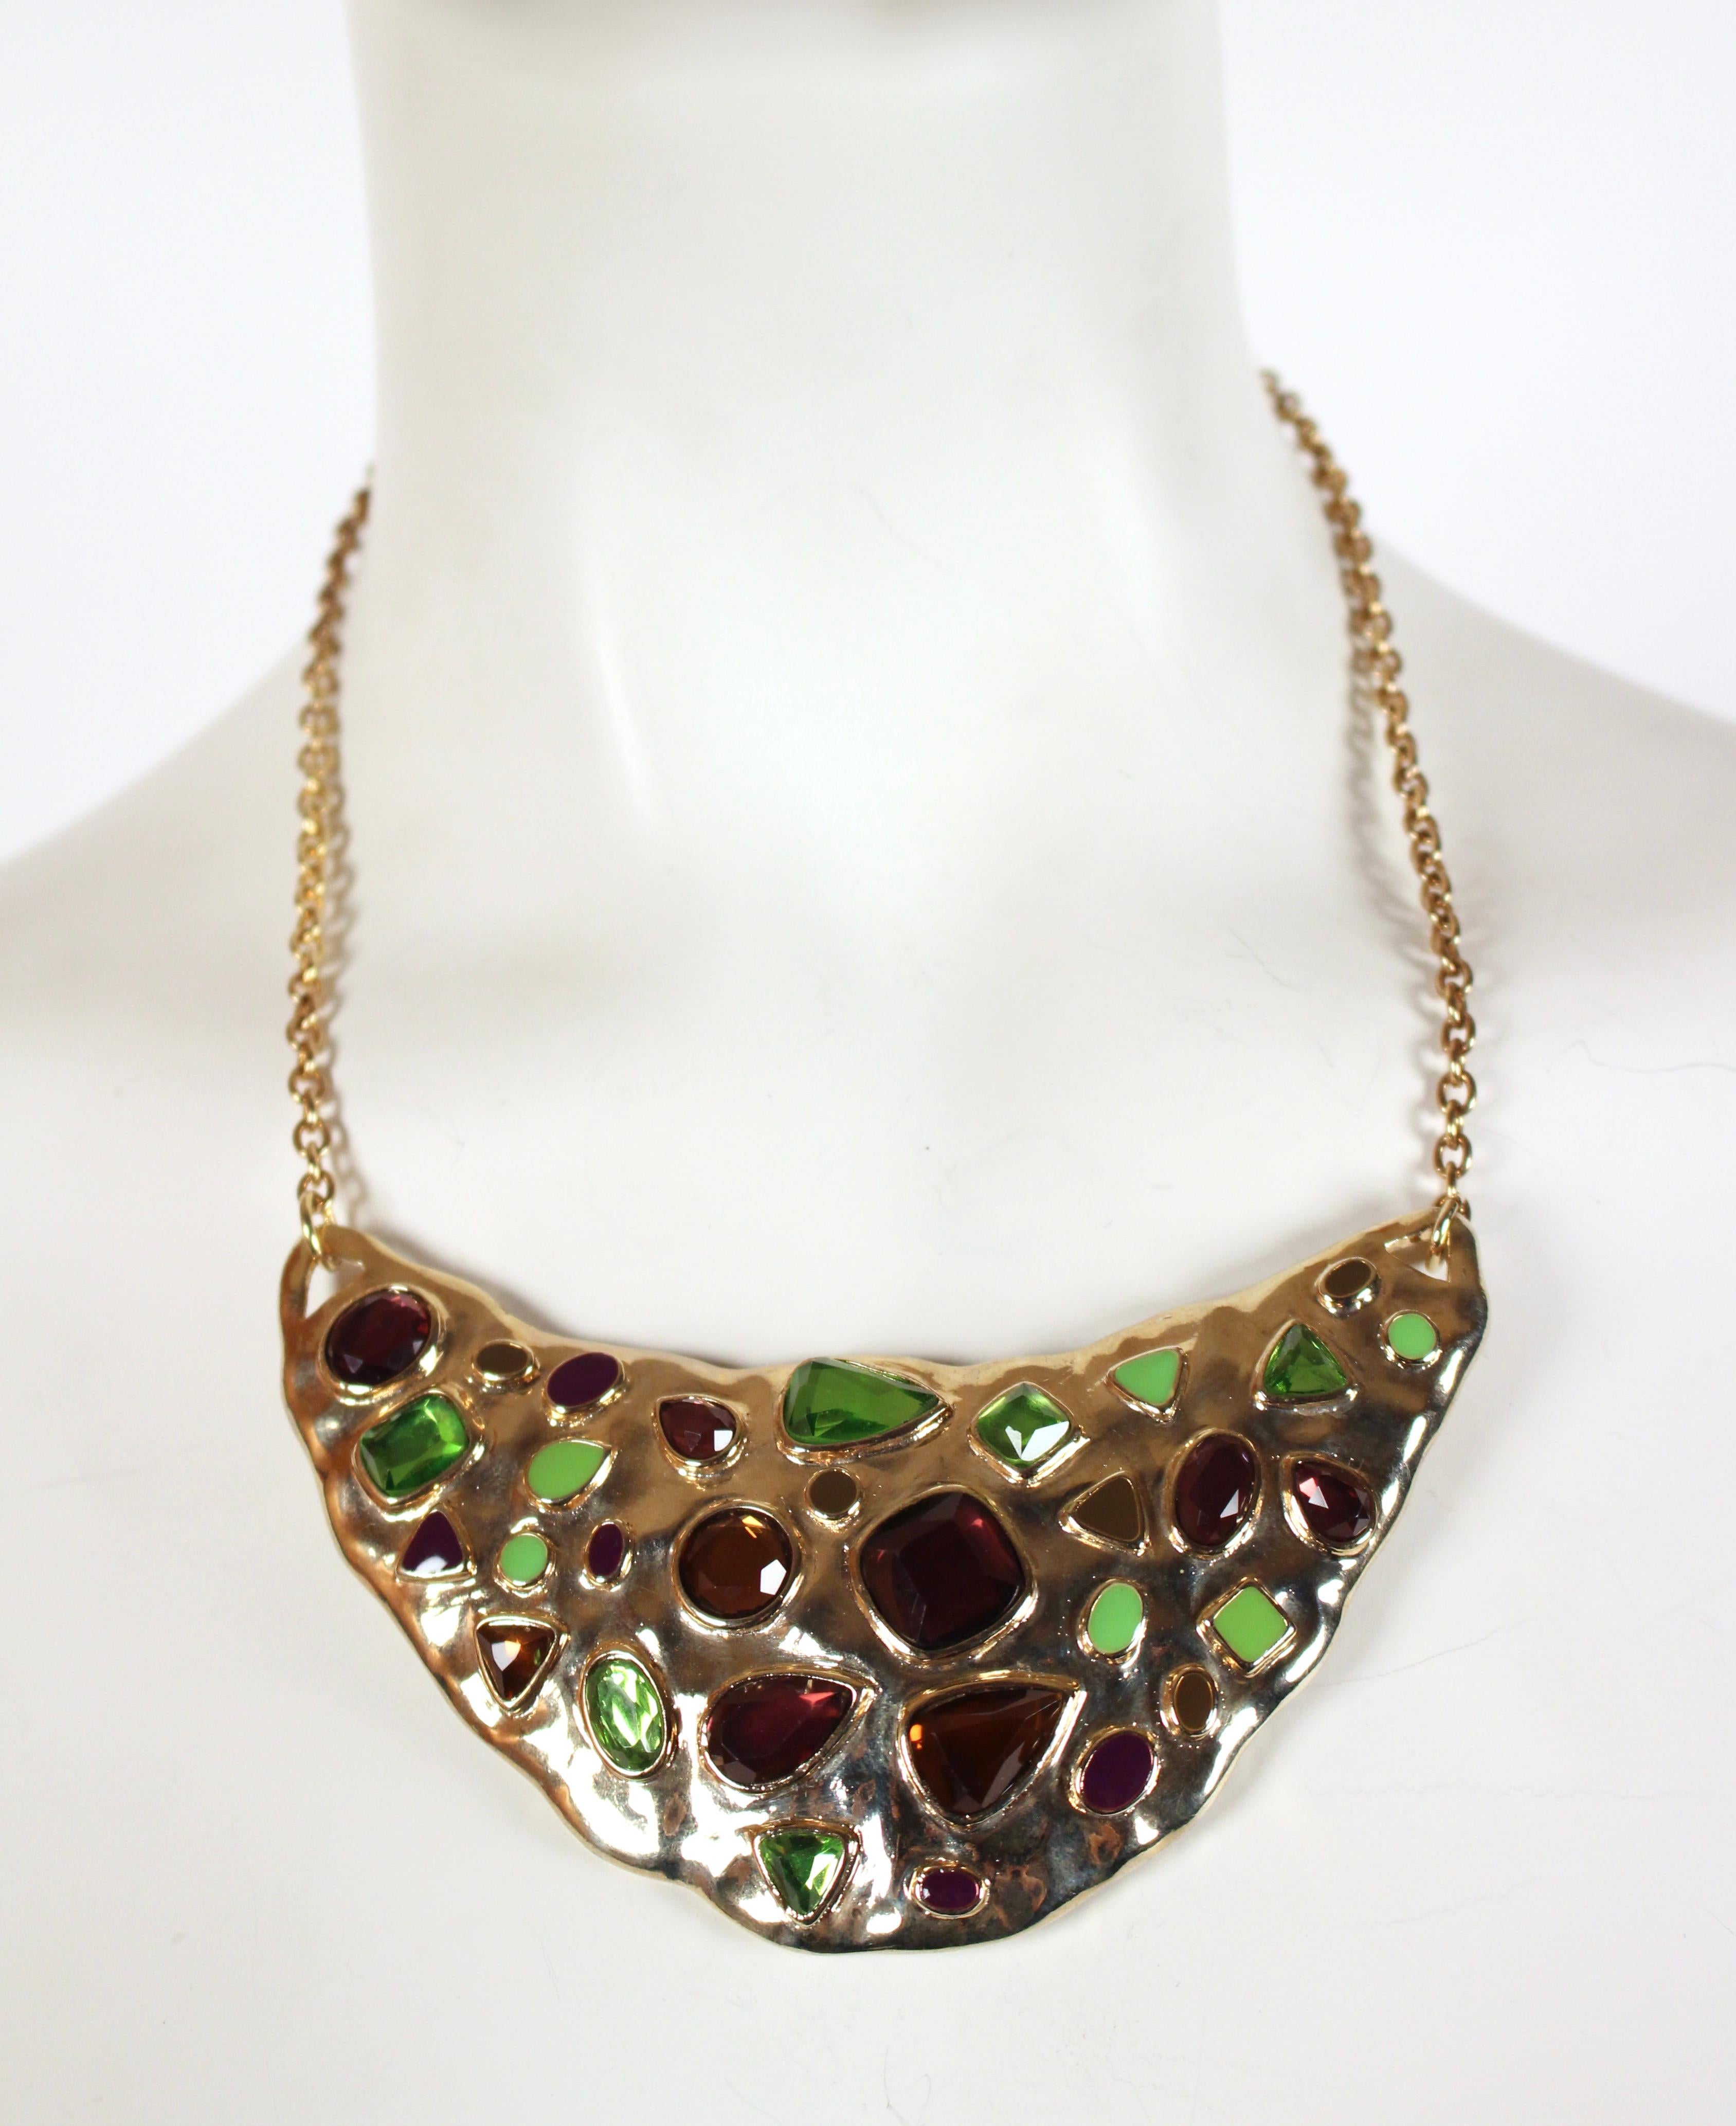 Striking, amethyst, peridot and topaz faceted glass crystal bib necklace with enamel accents designed by Yves Saint Laurent dating to the 1990's. Adjustable spring closure. Measures approximately 16-19